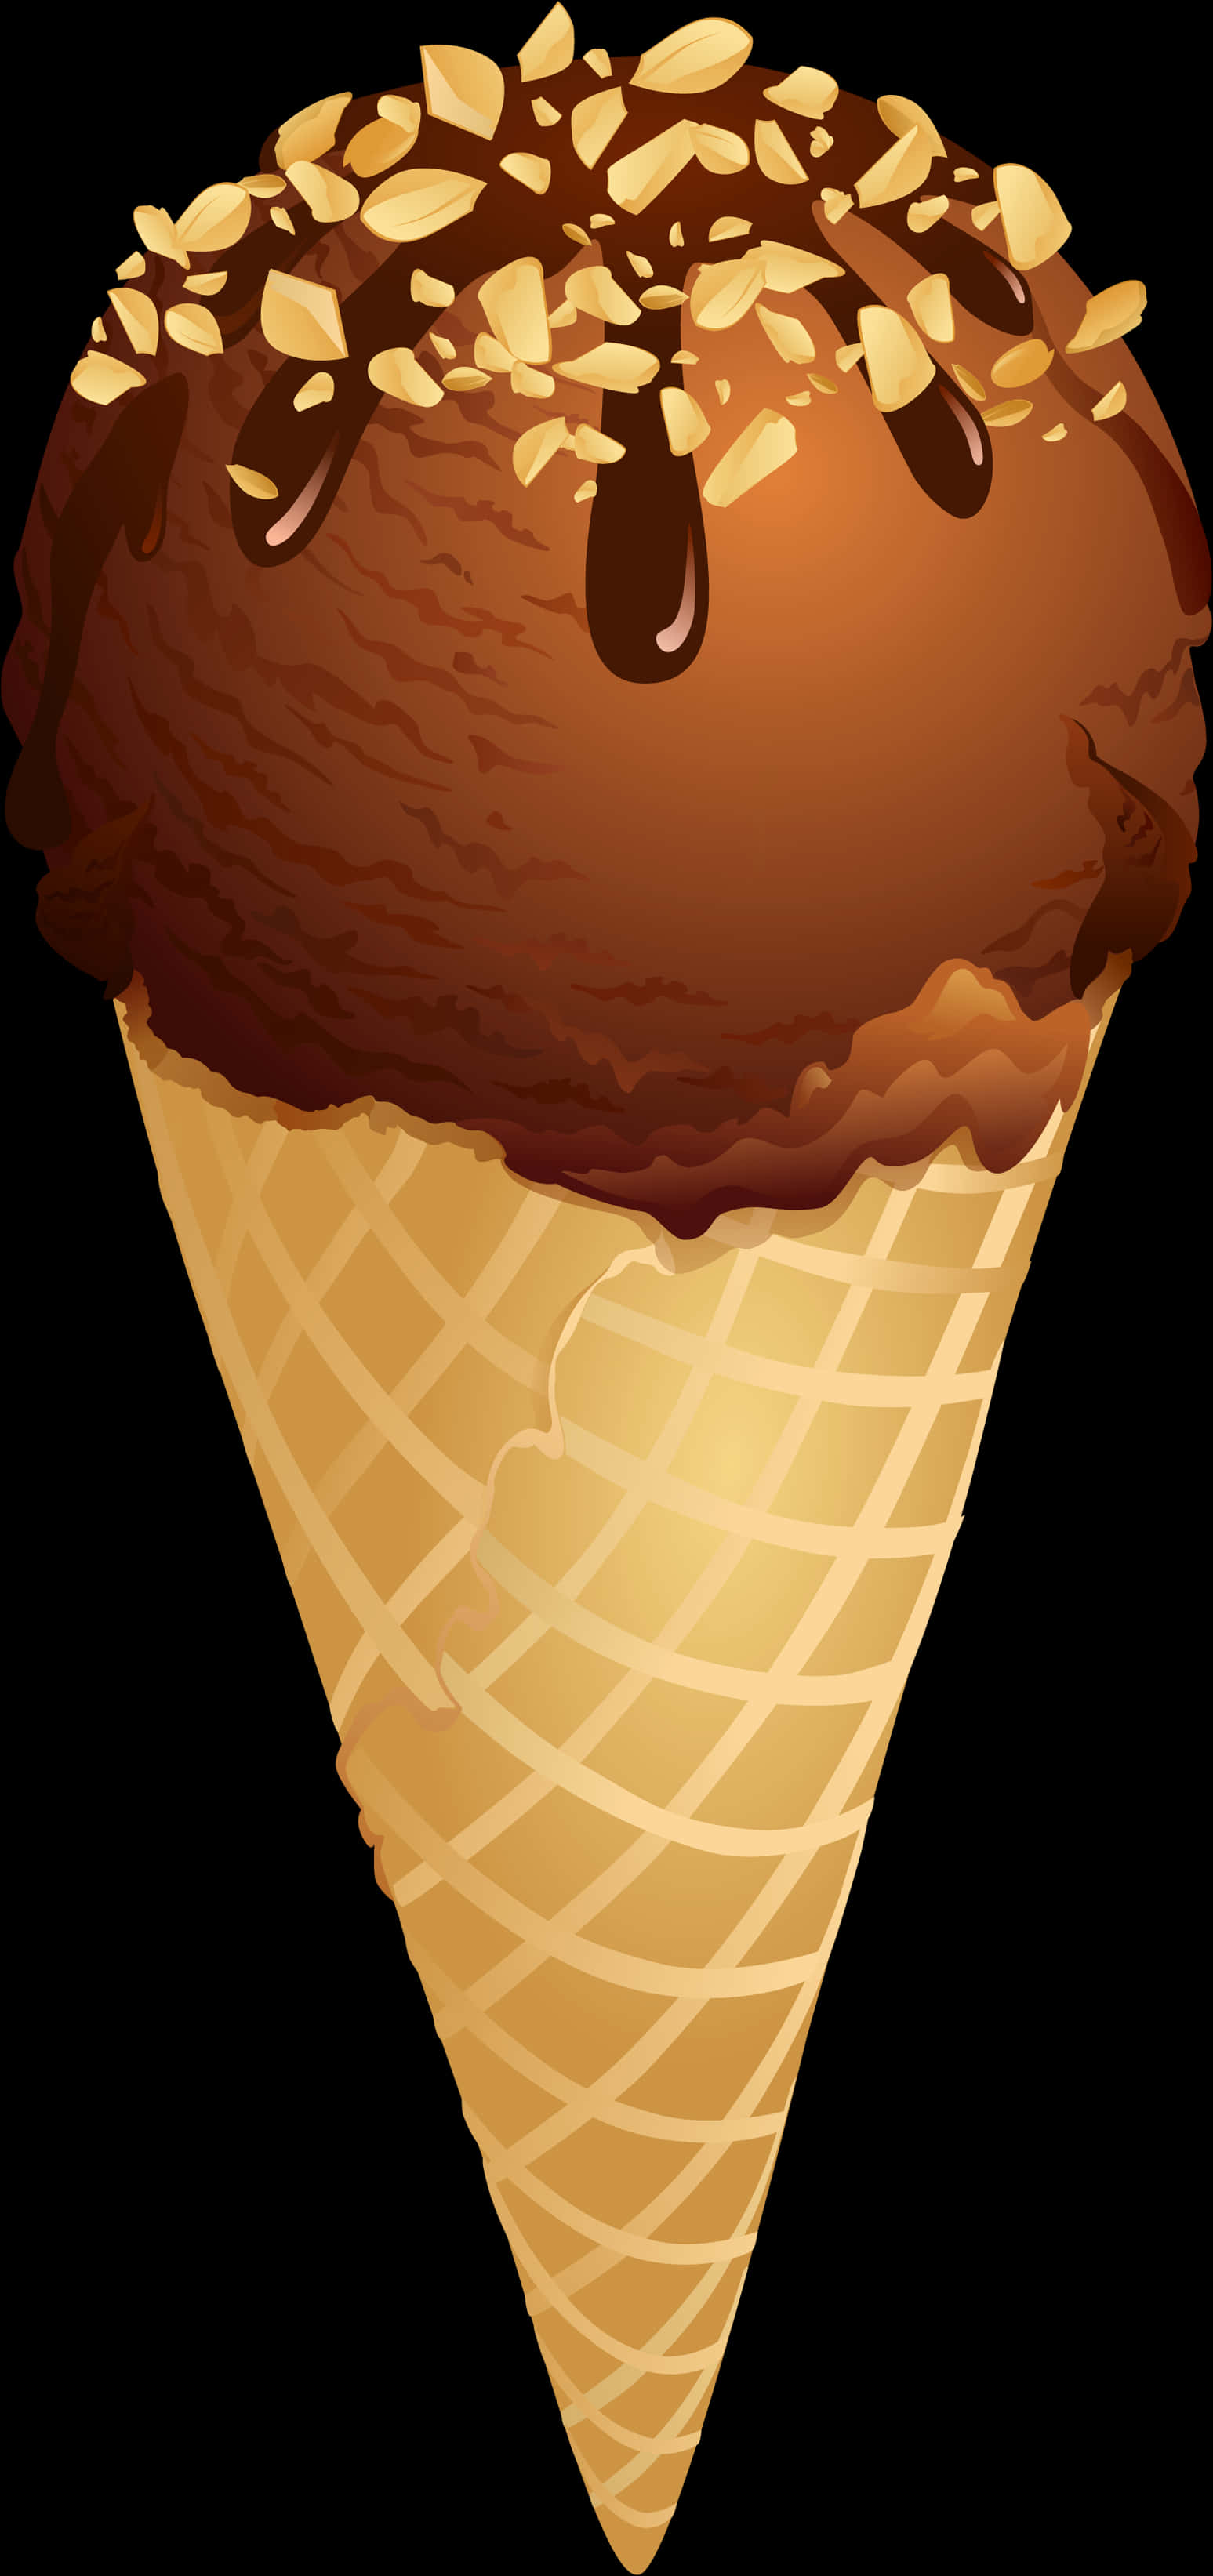 Chocolate Almond Ice Cream Cone Clipart PNG image